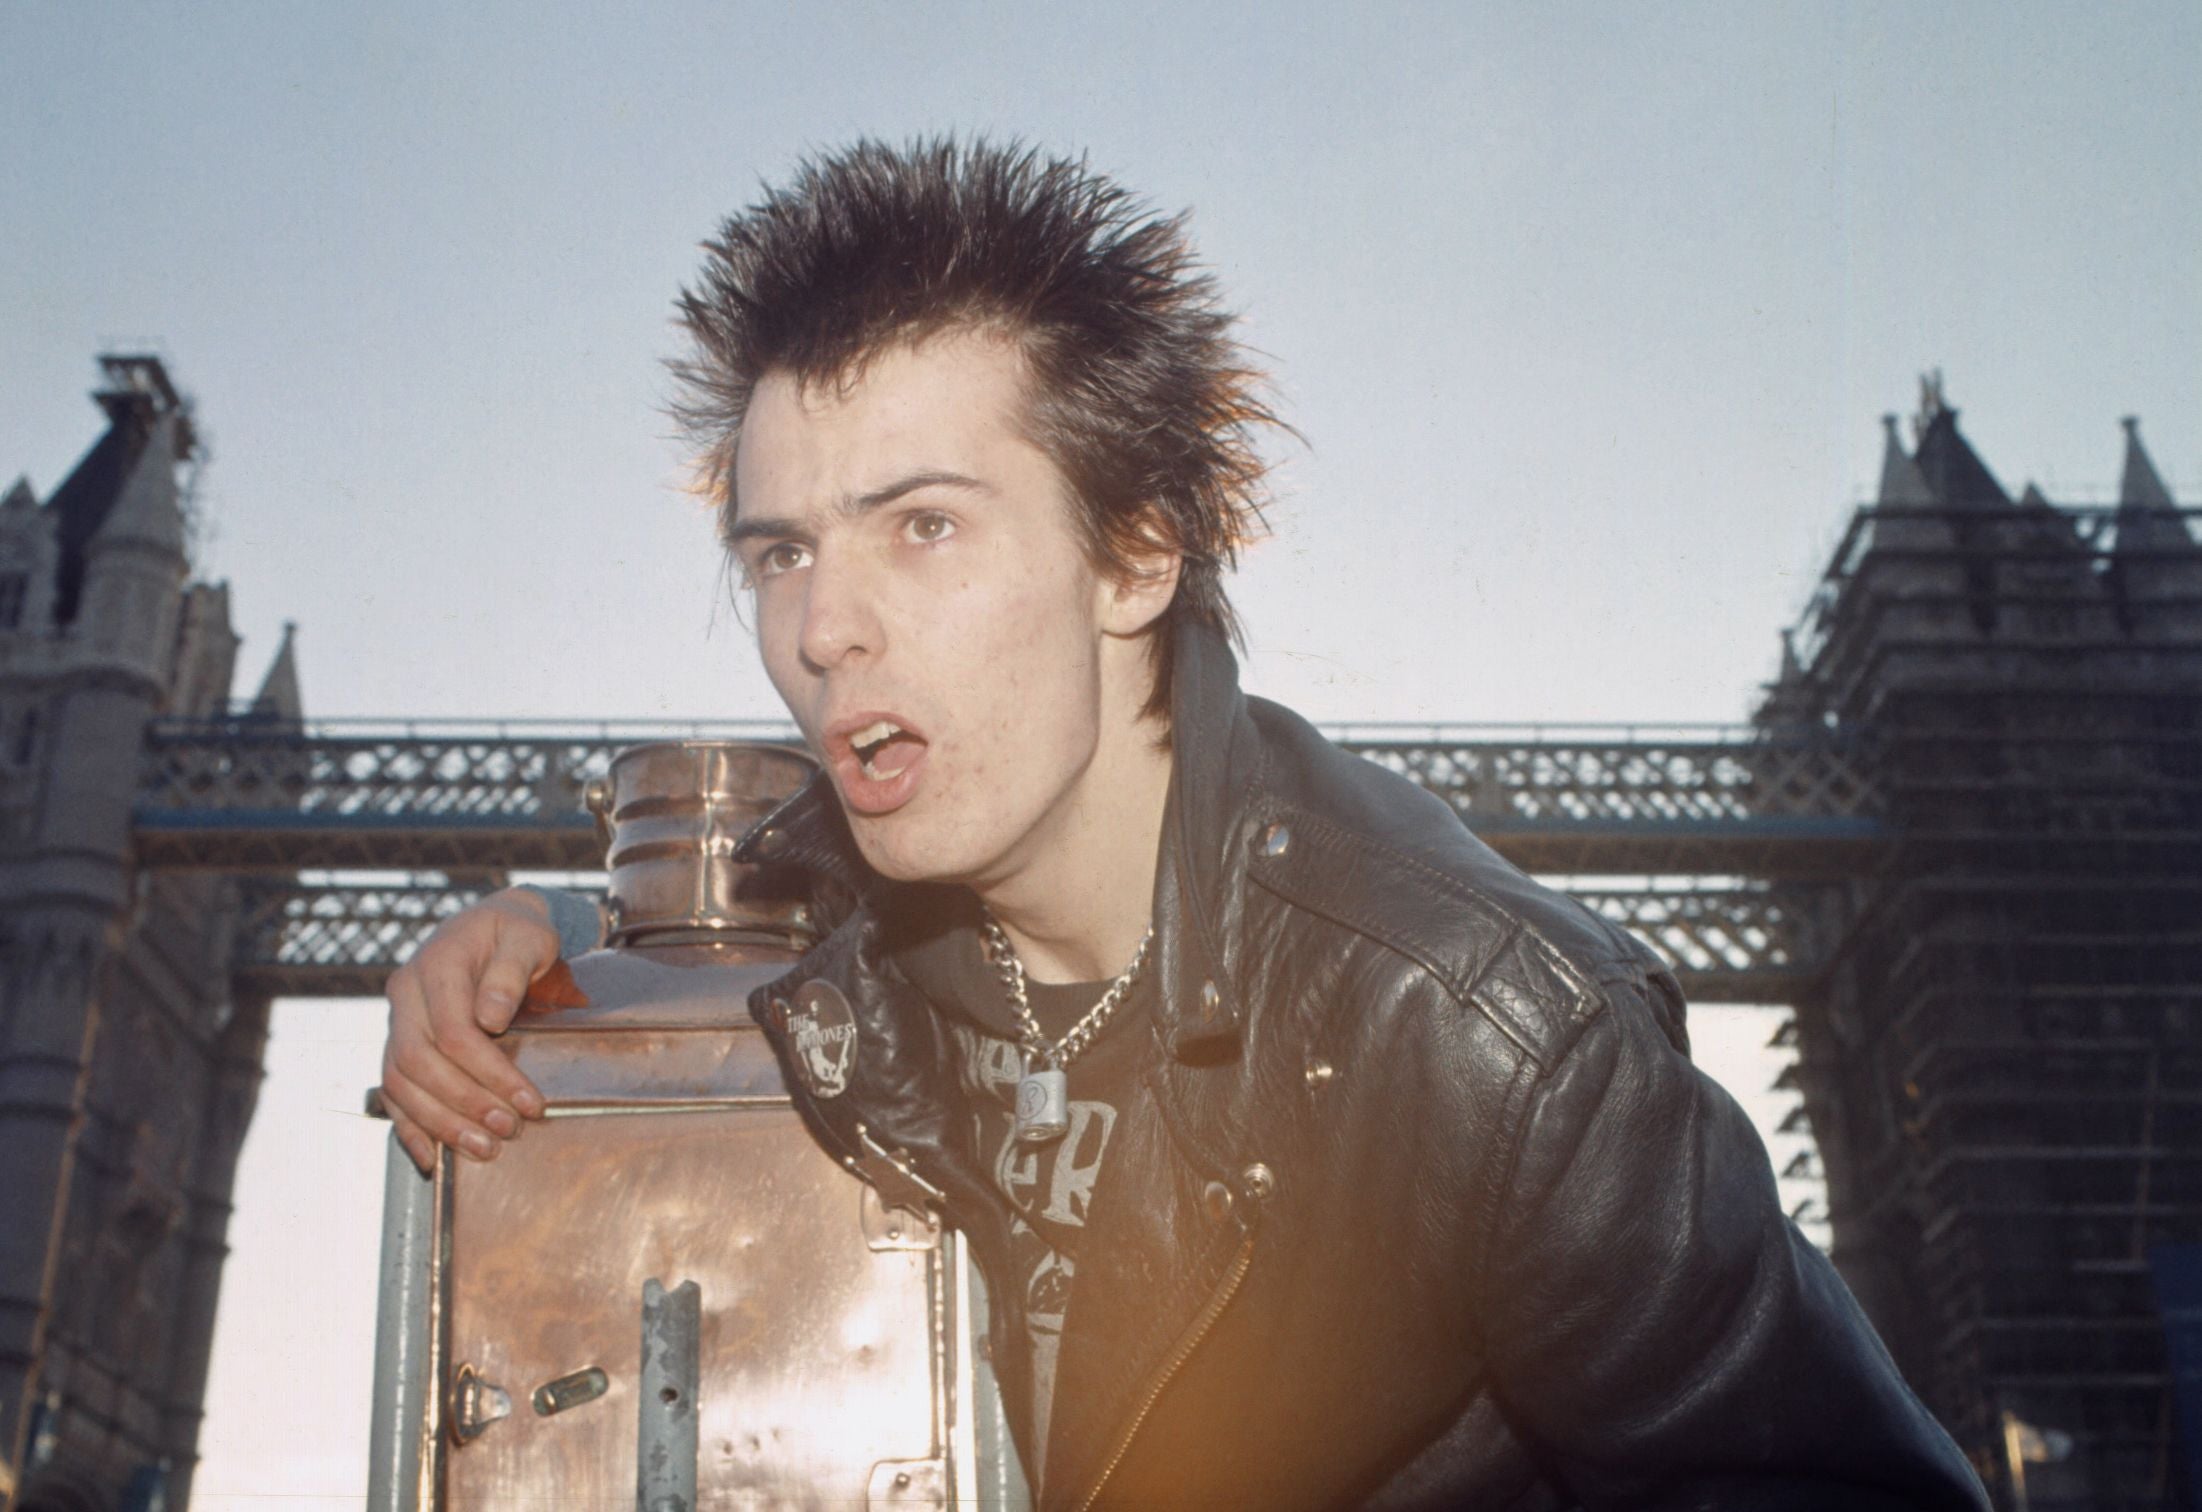 Sid Vicious died aged 21 on 2 February 1979 in the New York apartment of aspiring actor Michelle Robinson